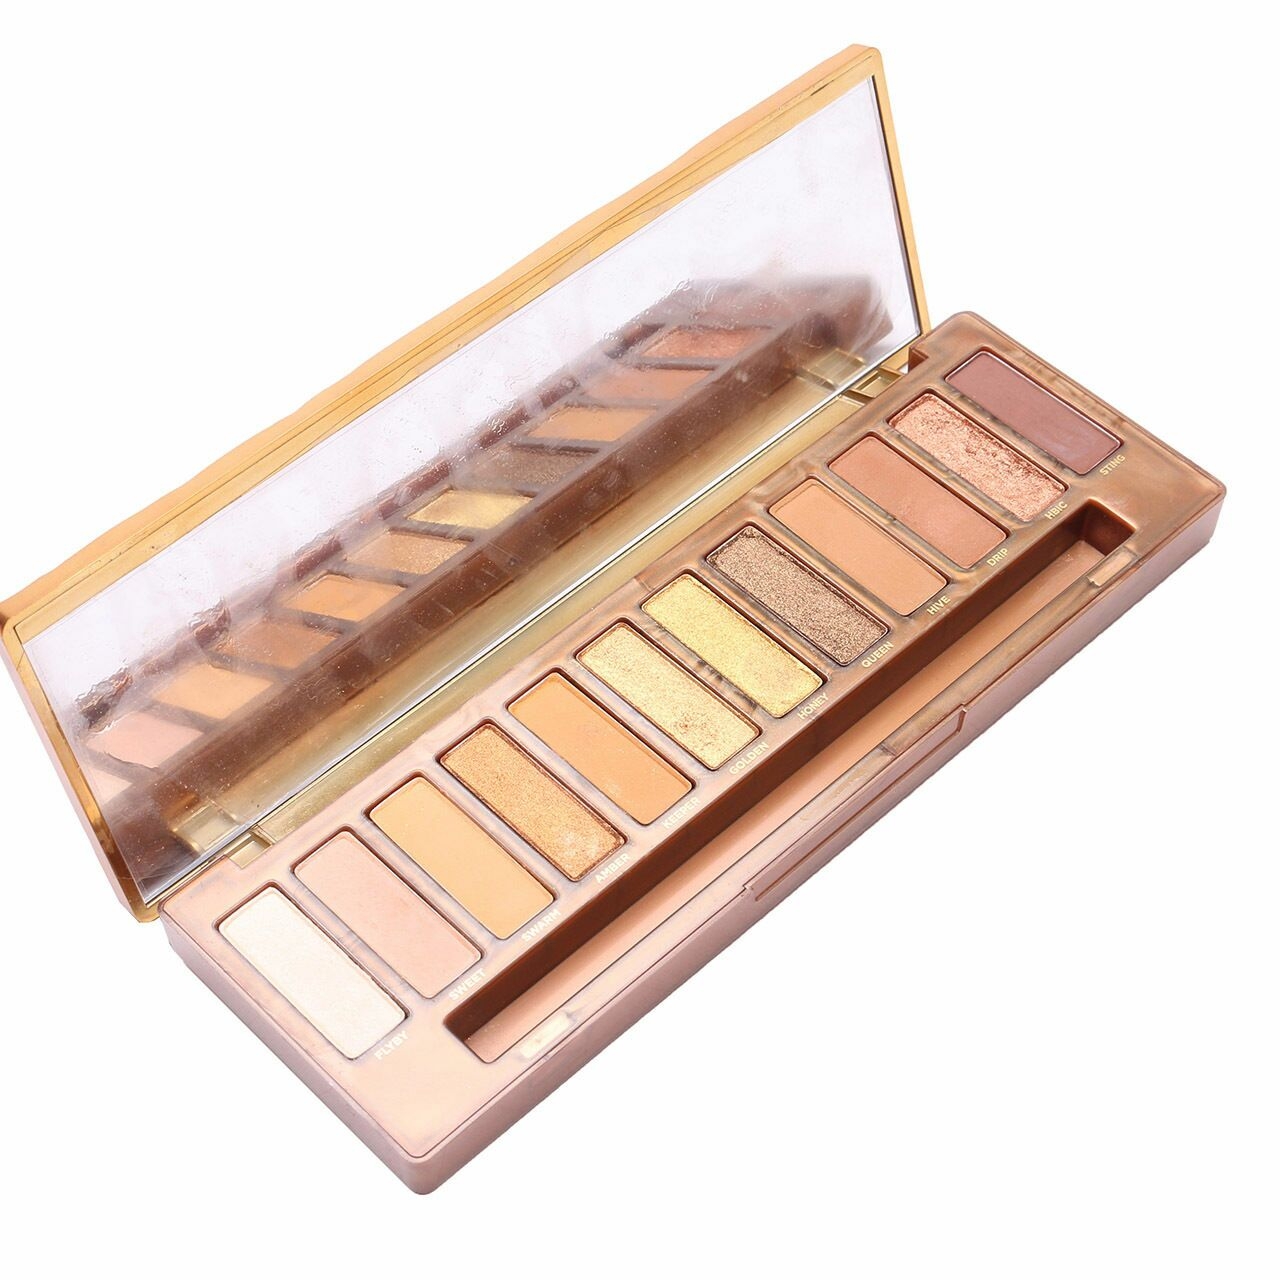 Urban Decay Naked Honey Sets and Palette